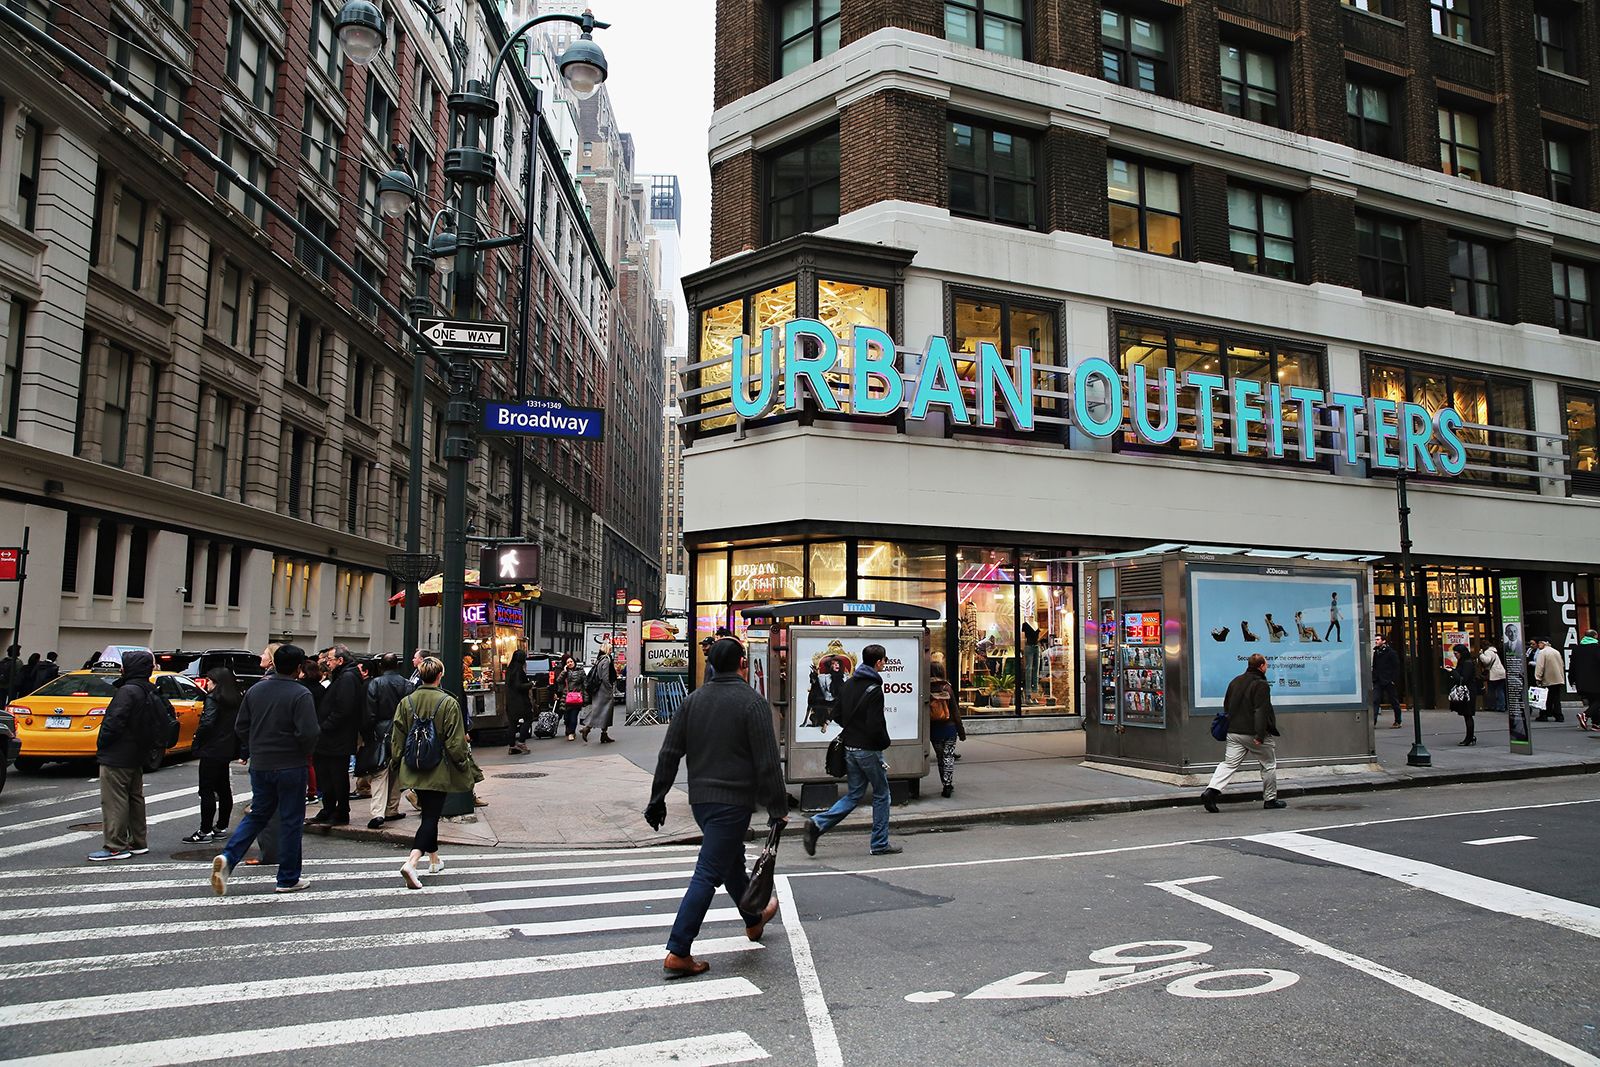 Urban Outfitters responds to claims that it uses code names for